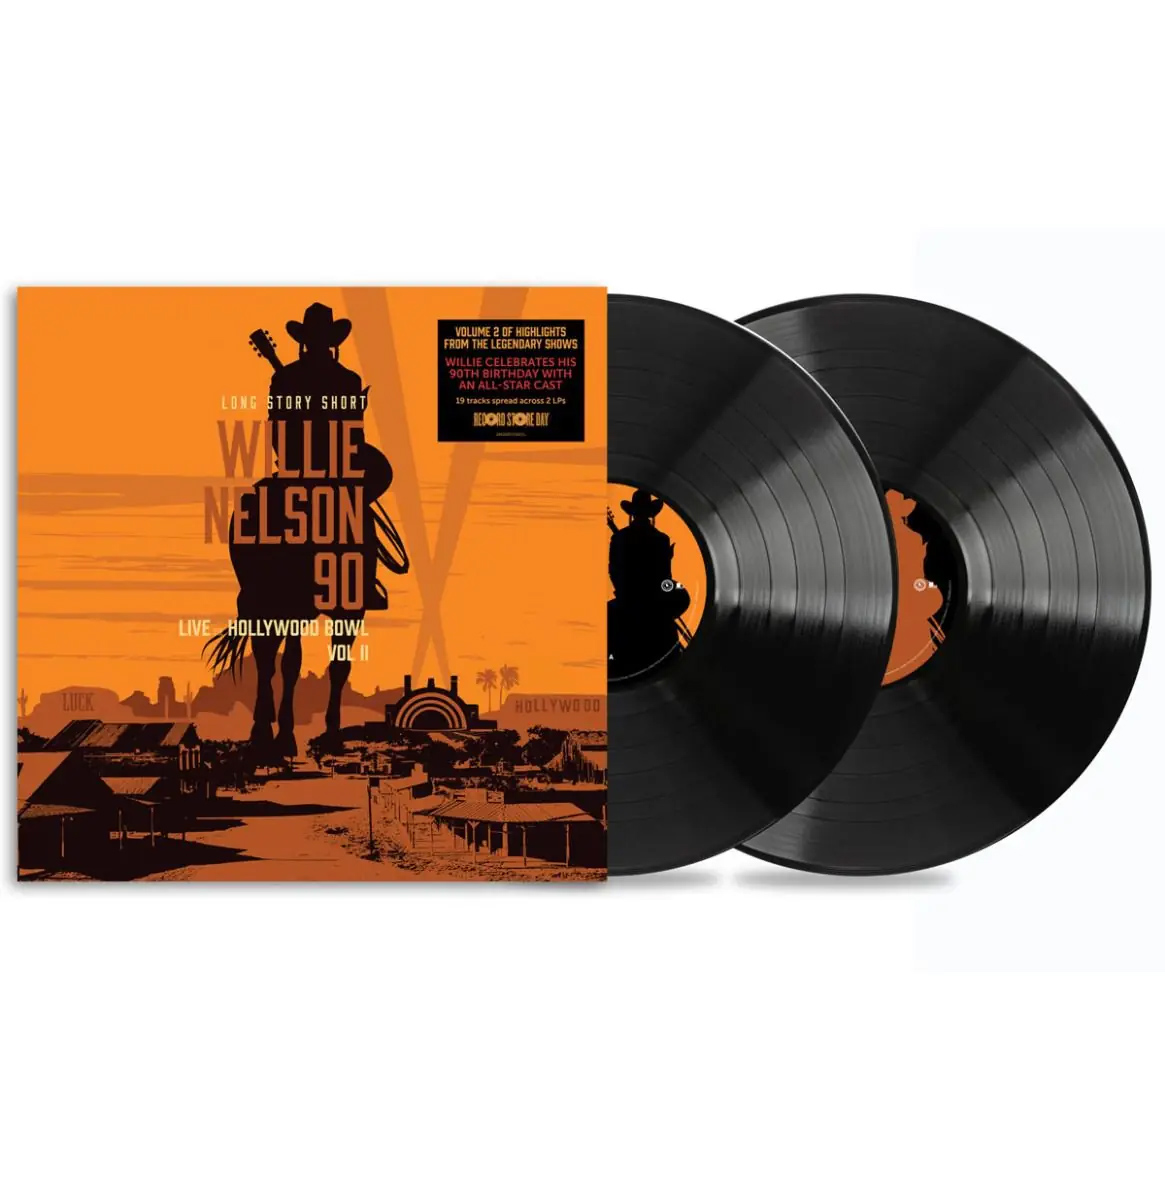 Long Story Short: Willie Nelson 90 - Live At The Hollywood Bowl Vol. II (Vinyl, Record Store Day) | Willie Nelson, Various Artists